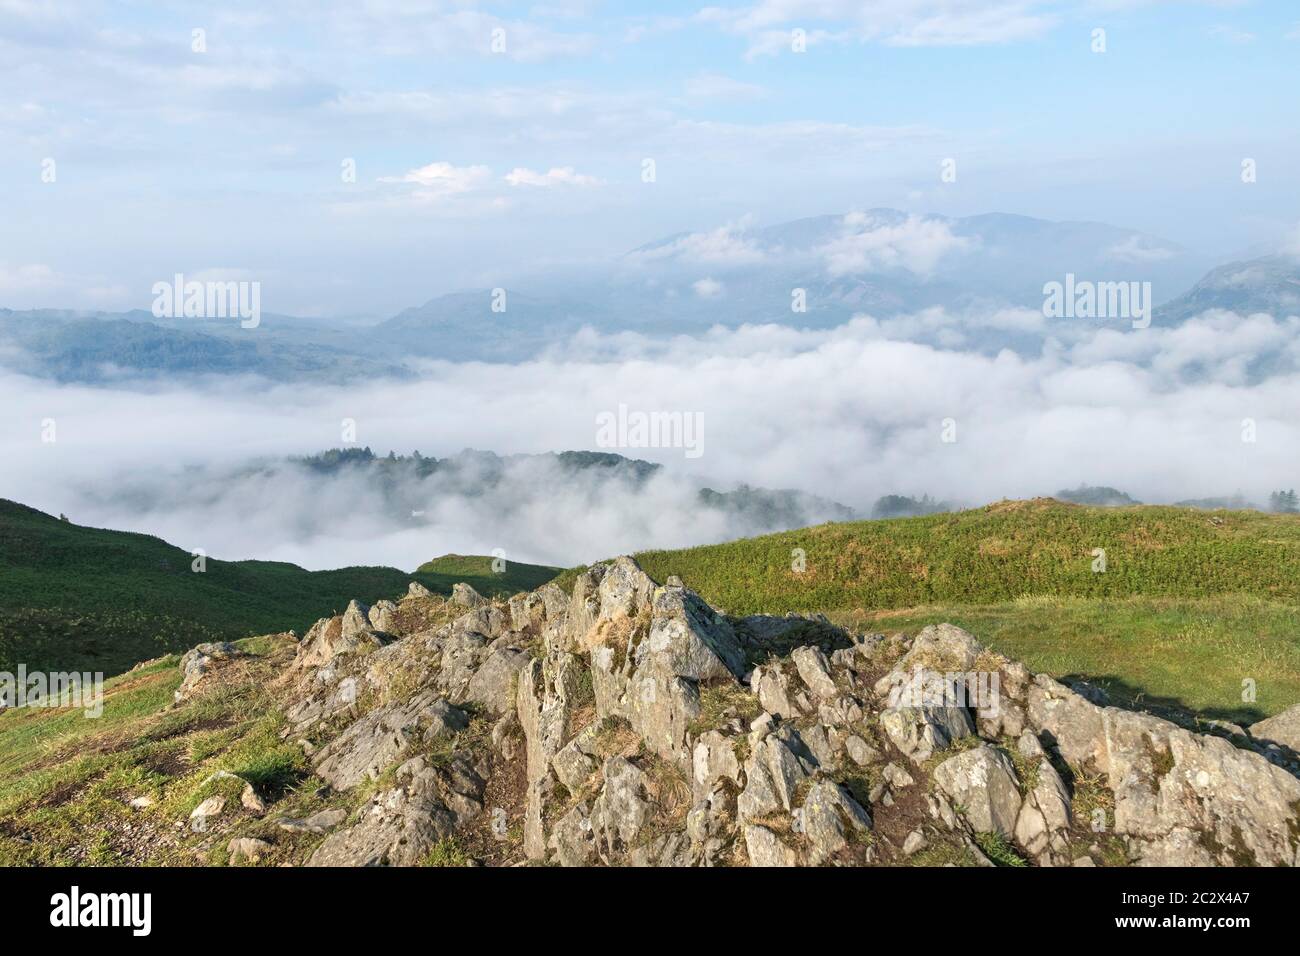 The Summit of Loughrigg Fell and the View West over Cloud Filled Valleys, Lake District, Cumbria, UK Stock Photo